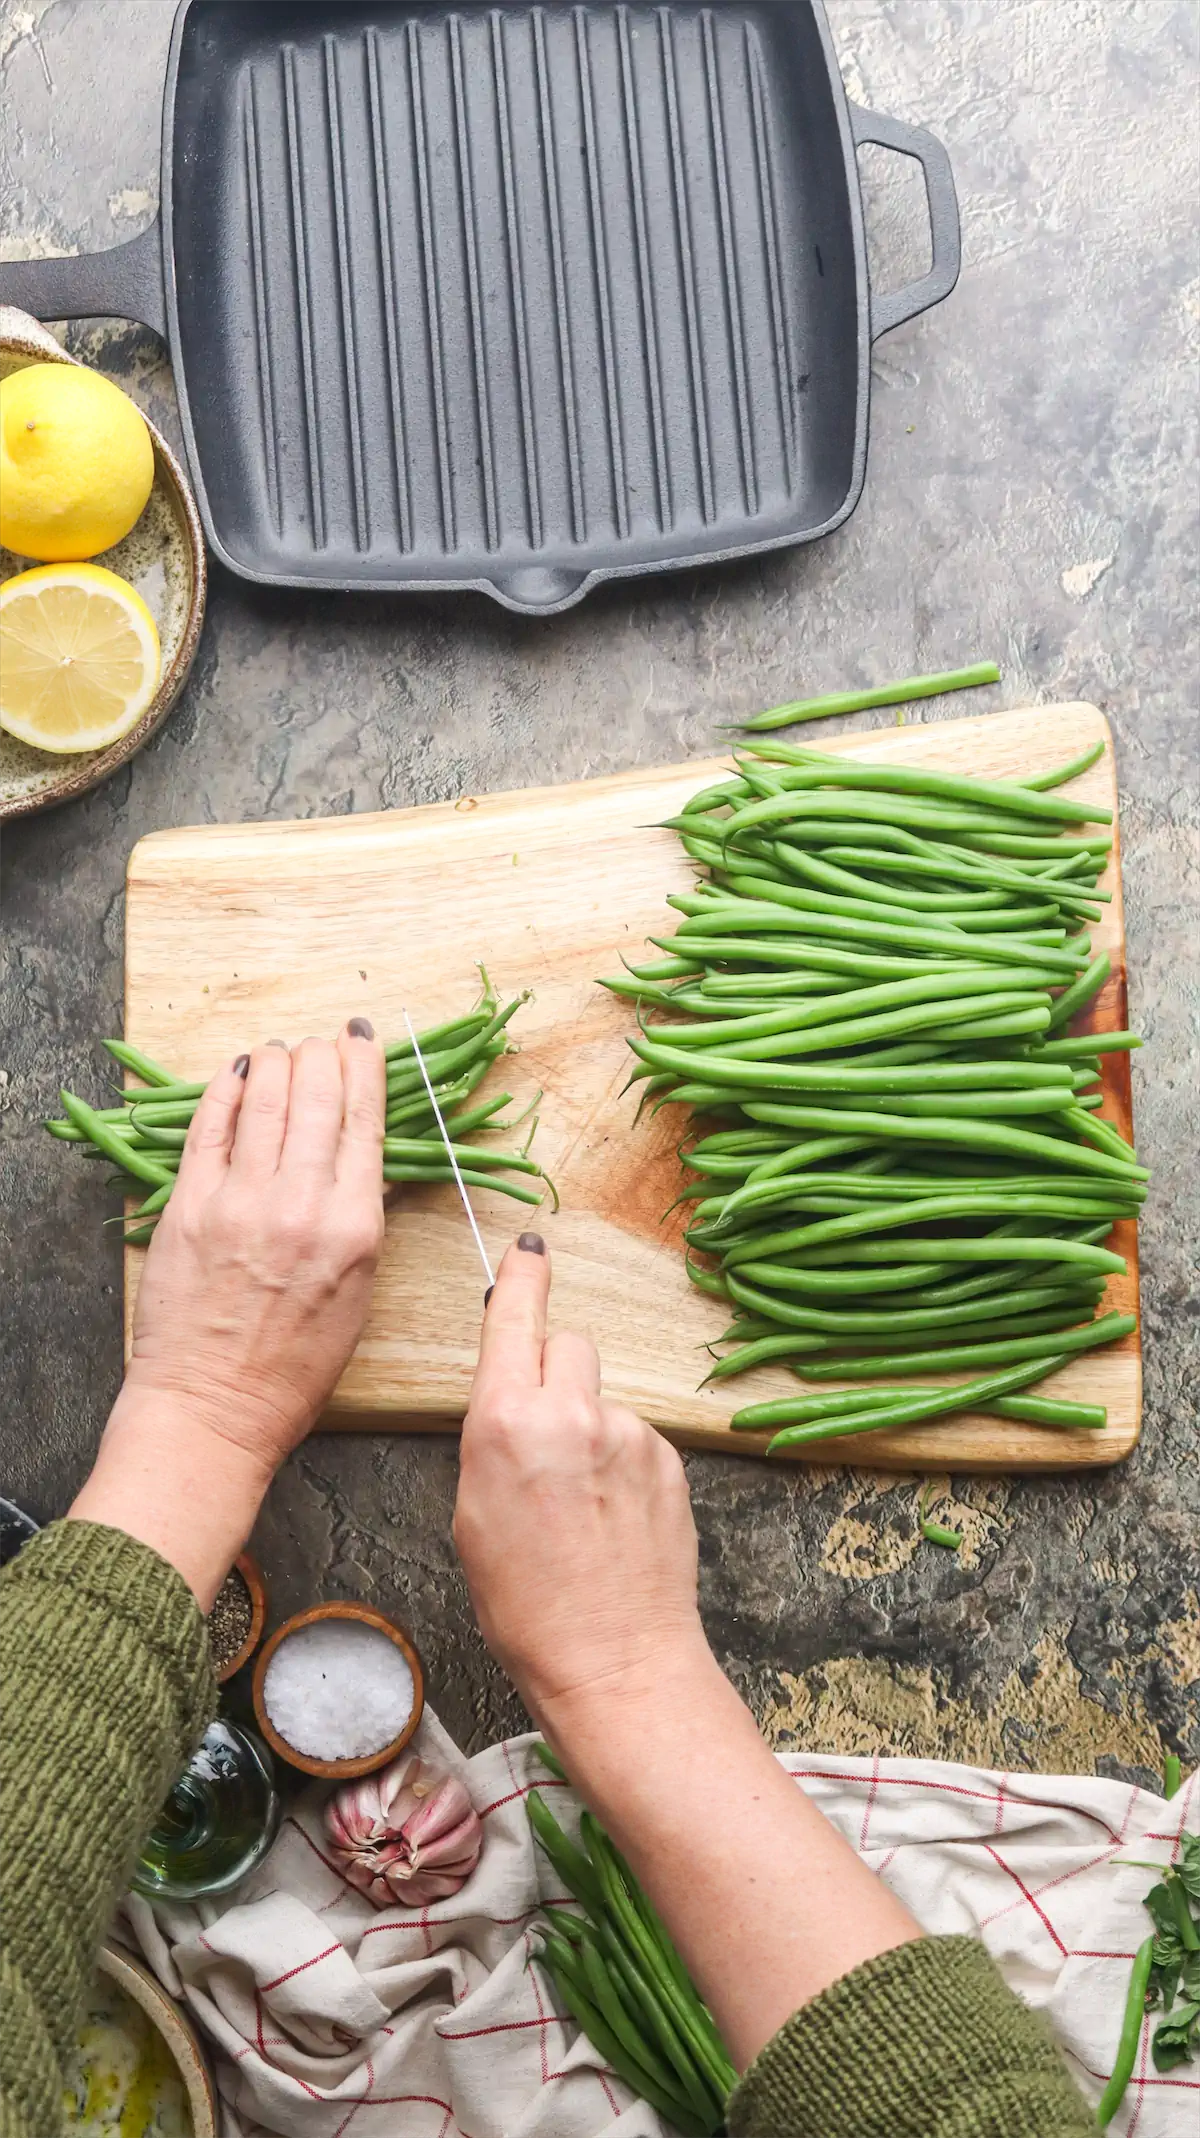 Green beans are being cut on the chopping board.